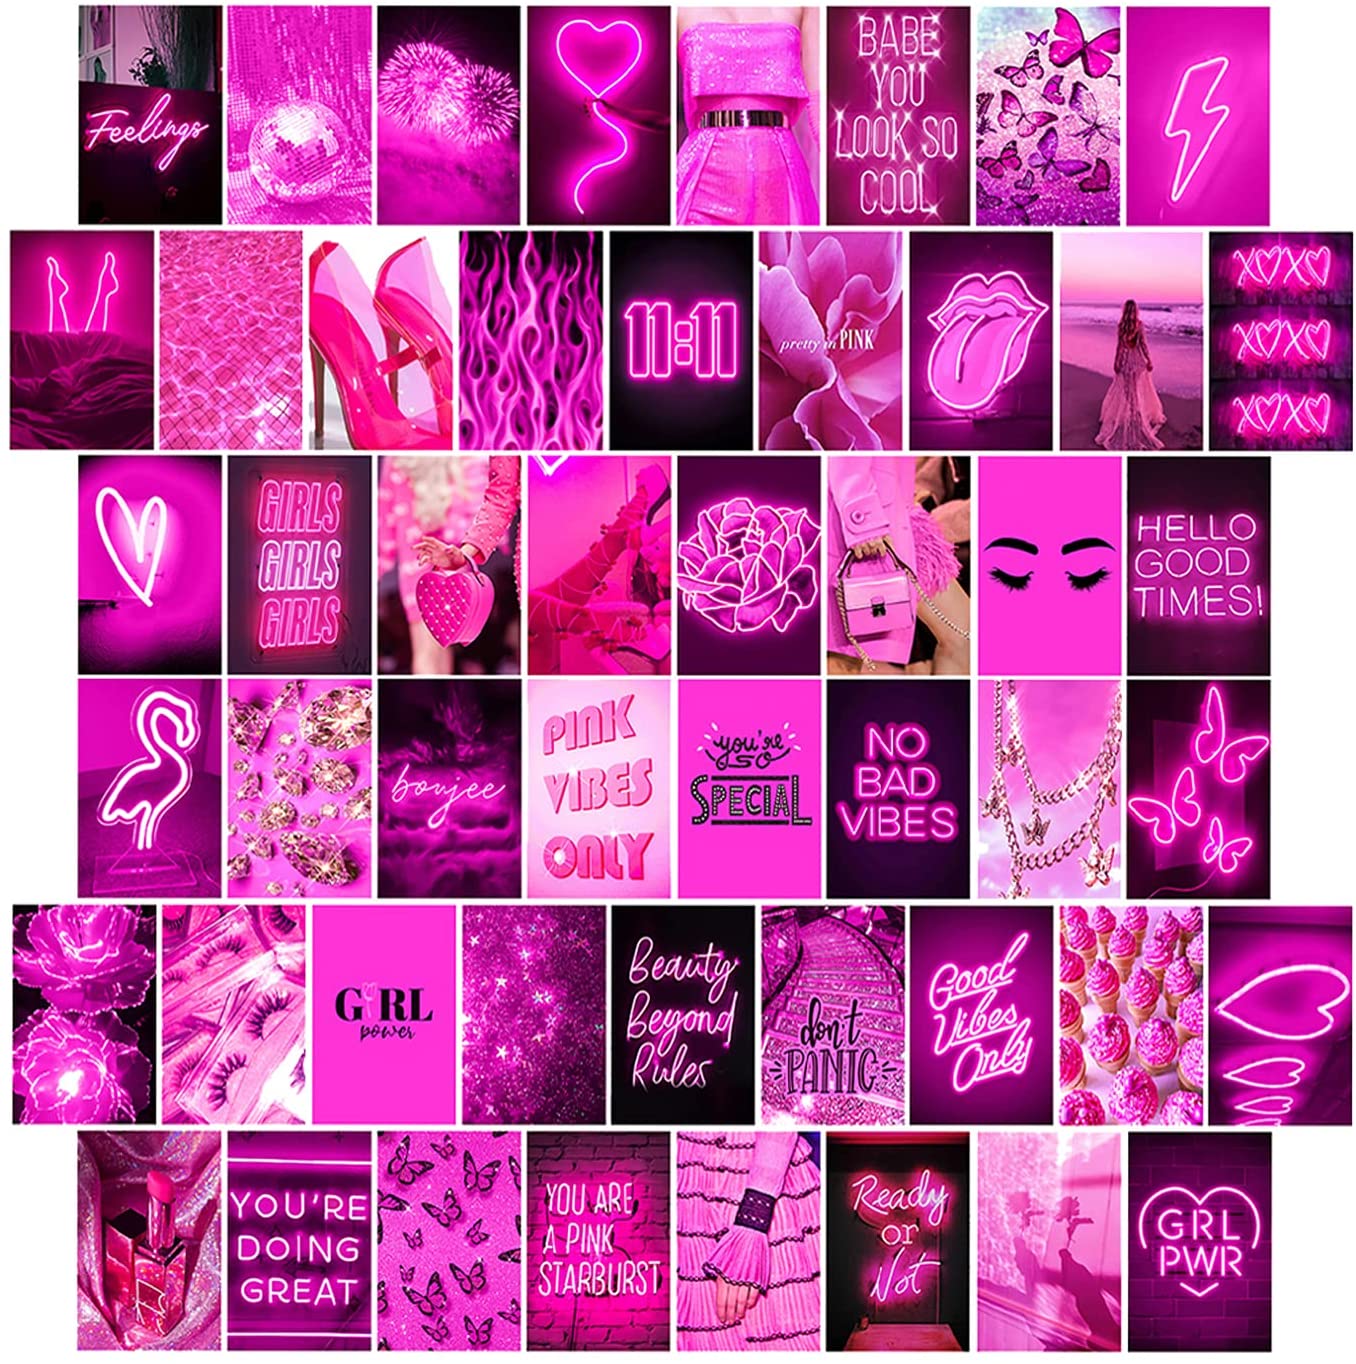 Woonkit Pink Neon Wall Collage Kit Aesthetic Picture, Trendy Room Decor for Teen Girls, Pink Collage Kit, Hot Pink Room Decor, Pink Room Decor Aesthetic, Hot Pink Wall Decor, 50pcs 4x6